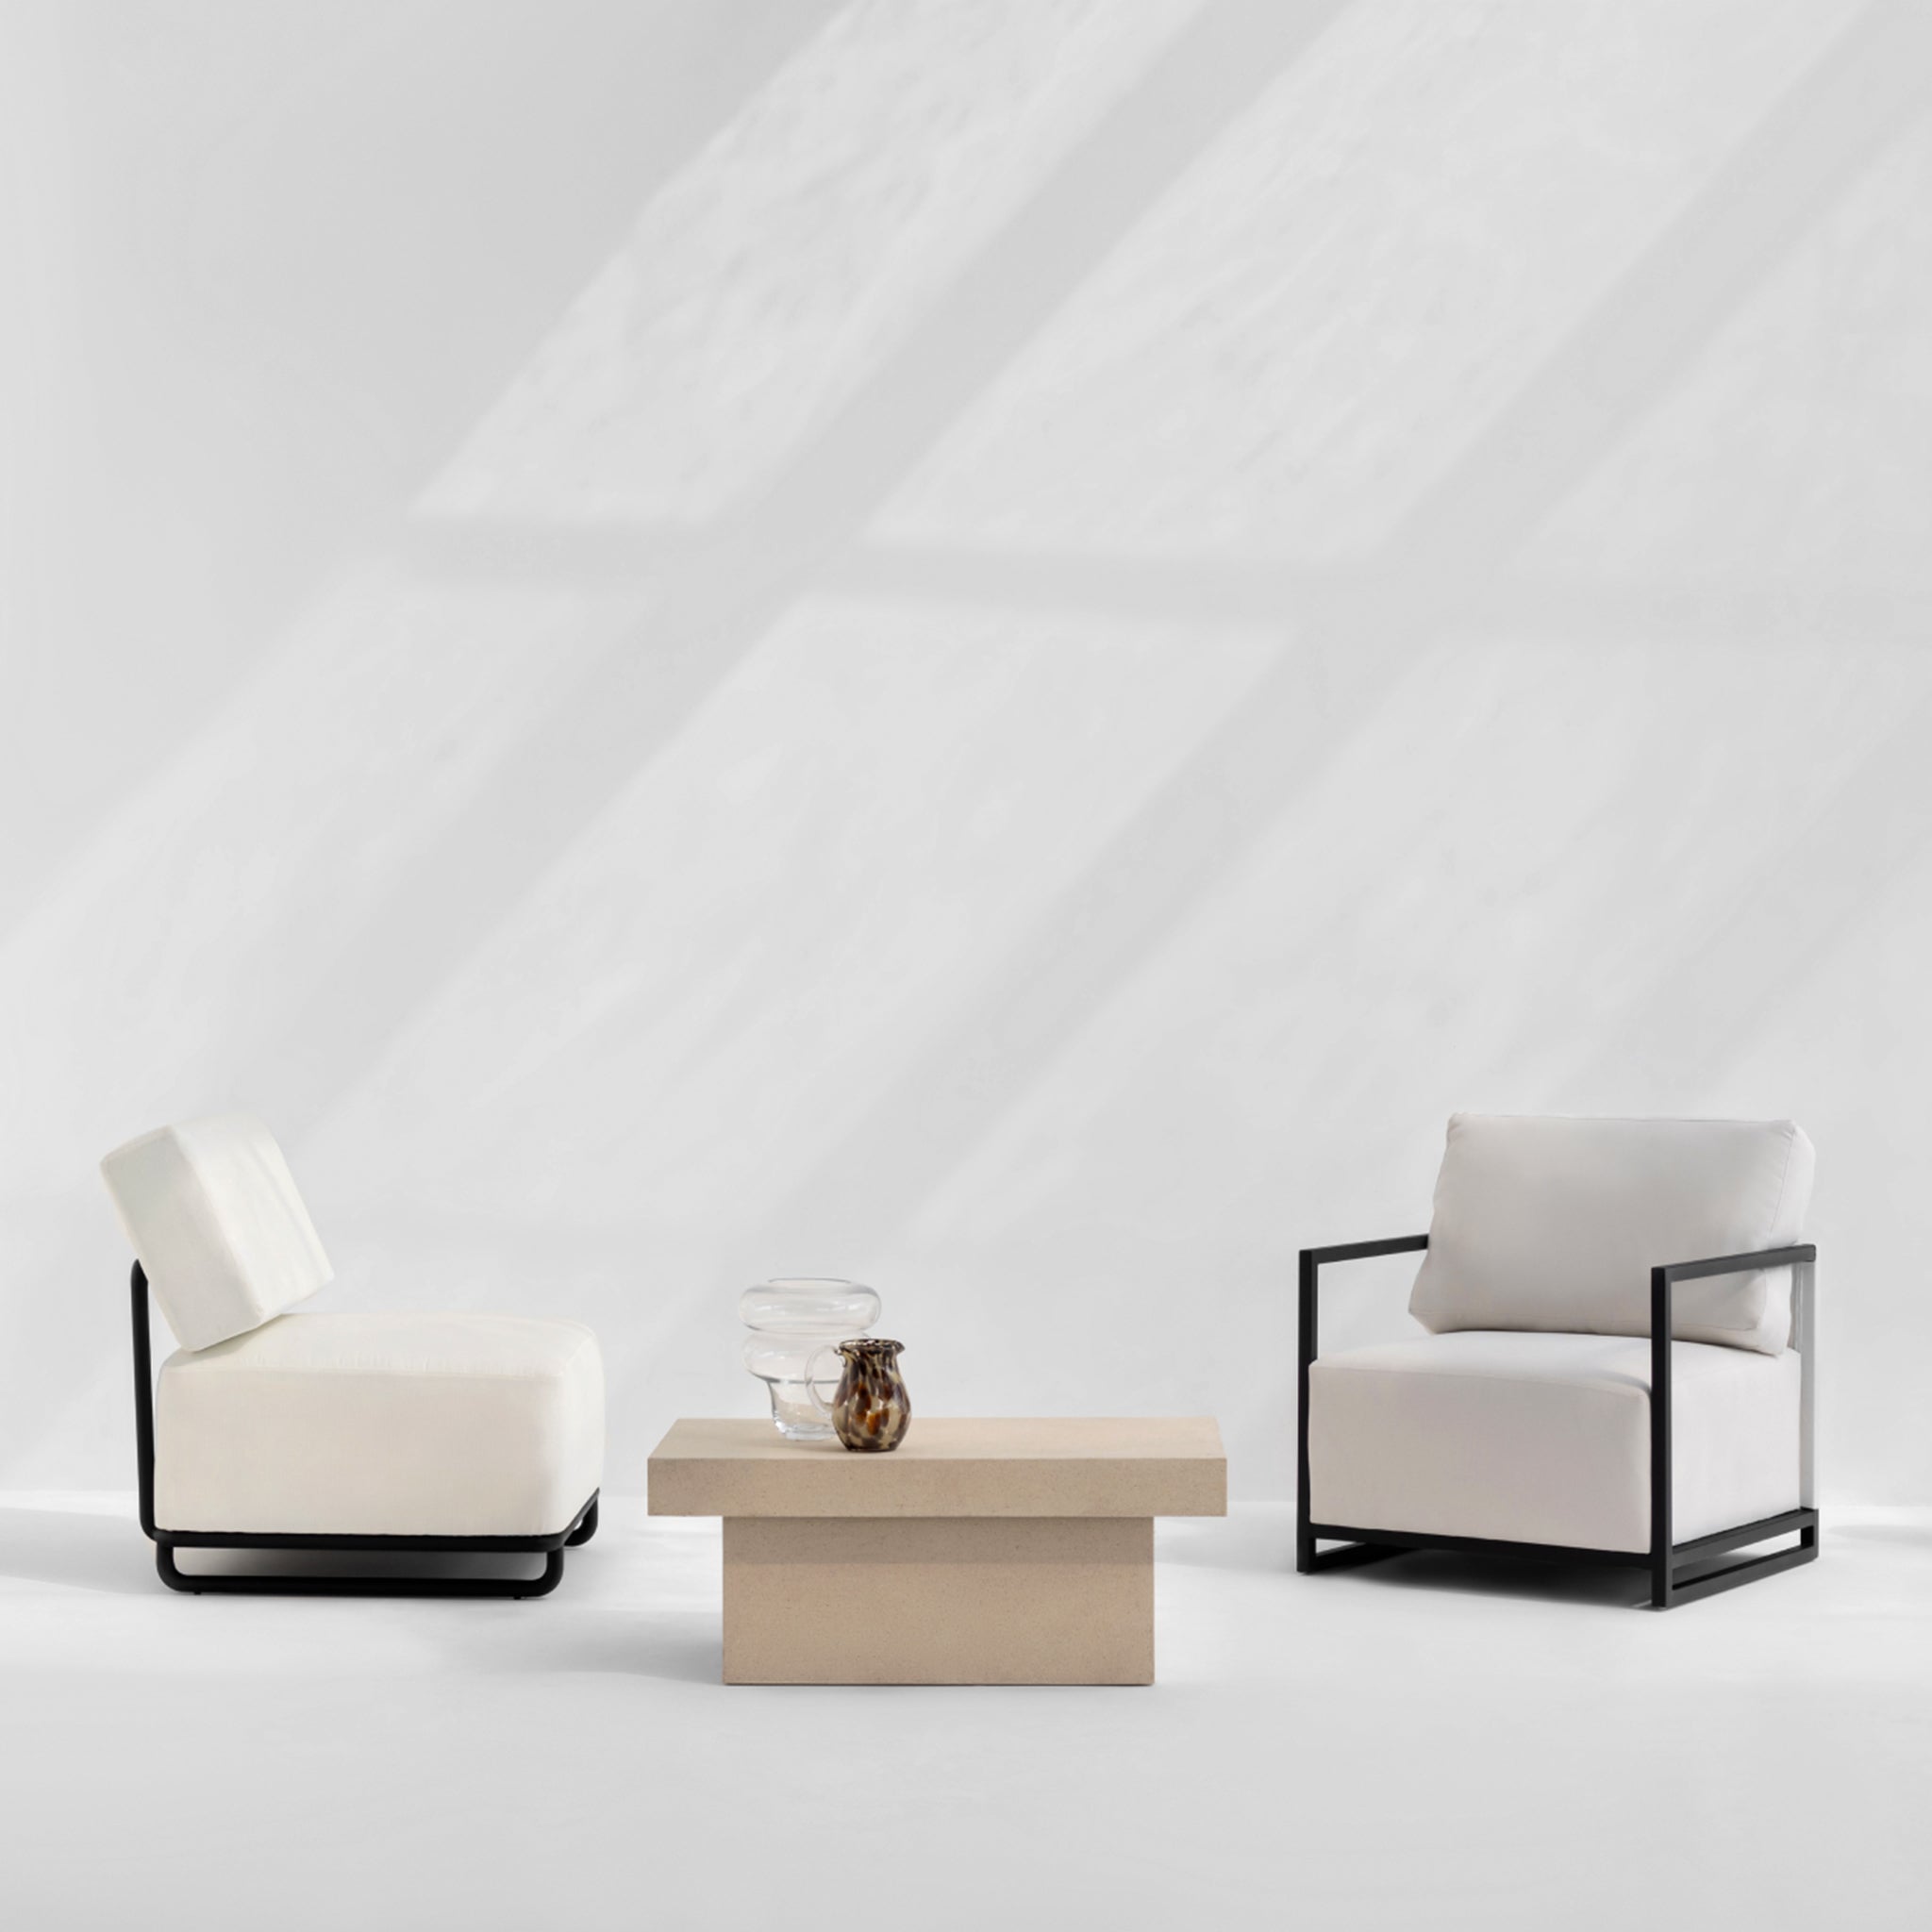 "The Trevor Outdoor Modular Accent Chair in white with sleek black frame, positioned next to a minimalist beige coffee table."